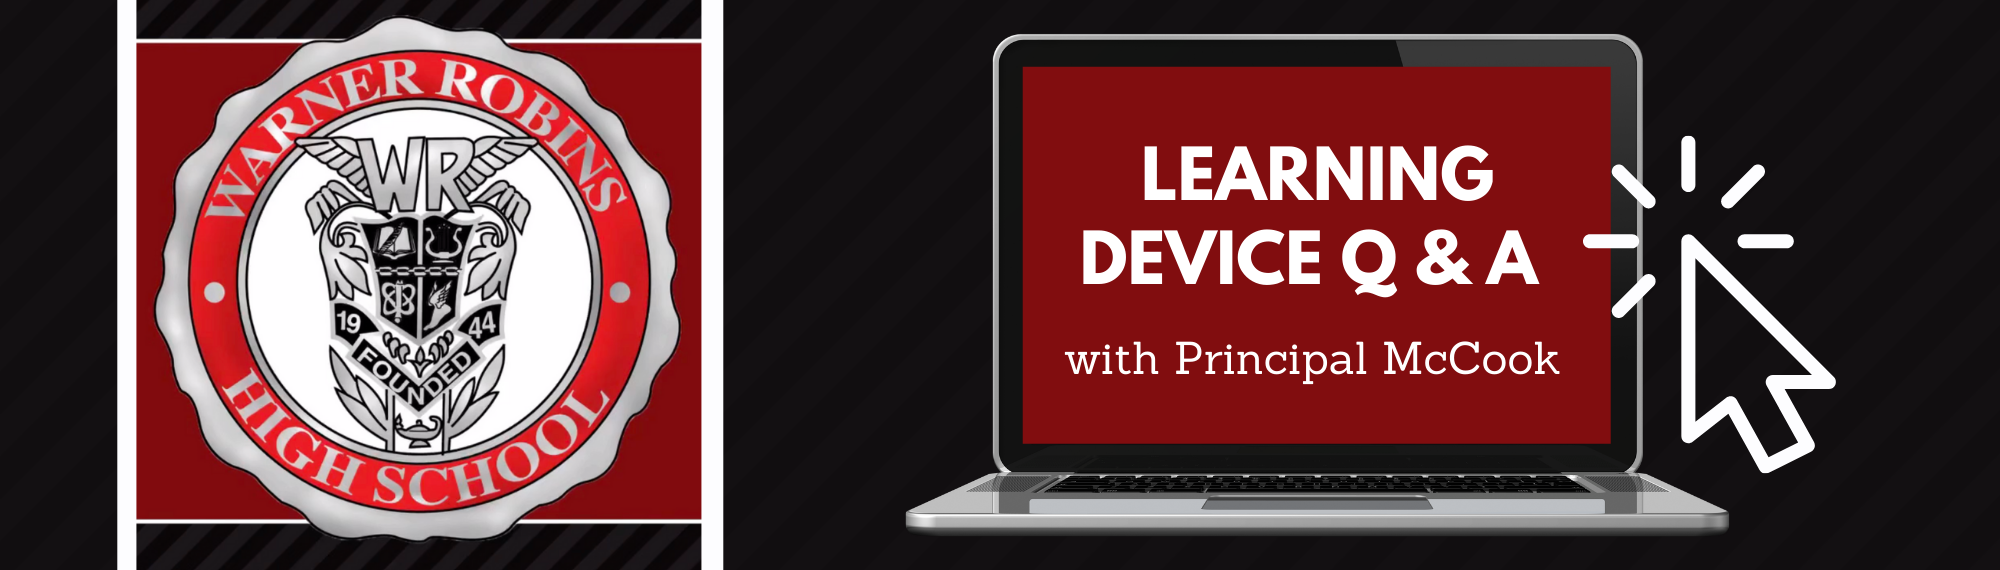 Learning Device Q&A with Principal McCook